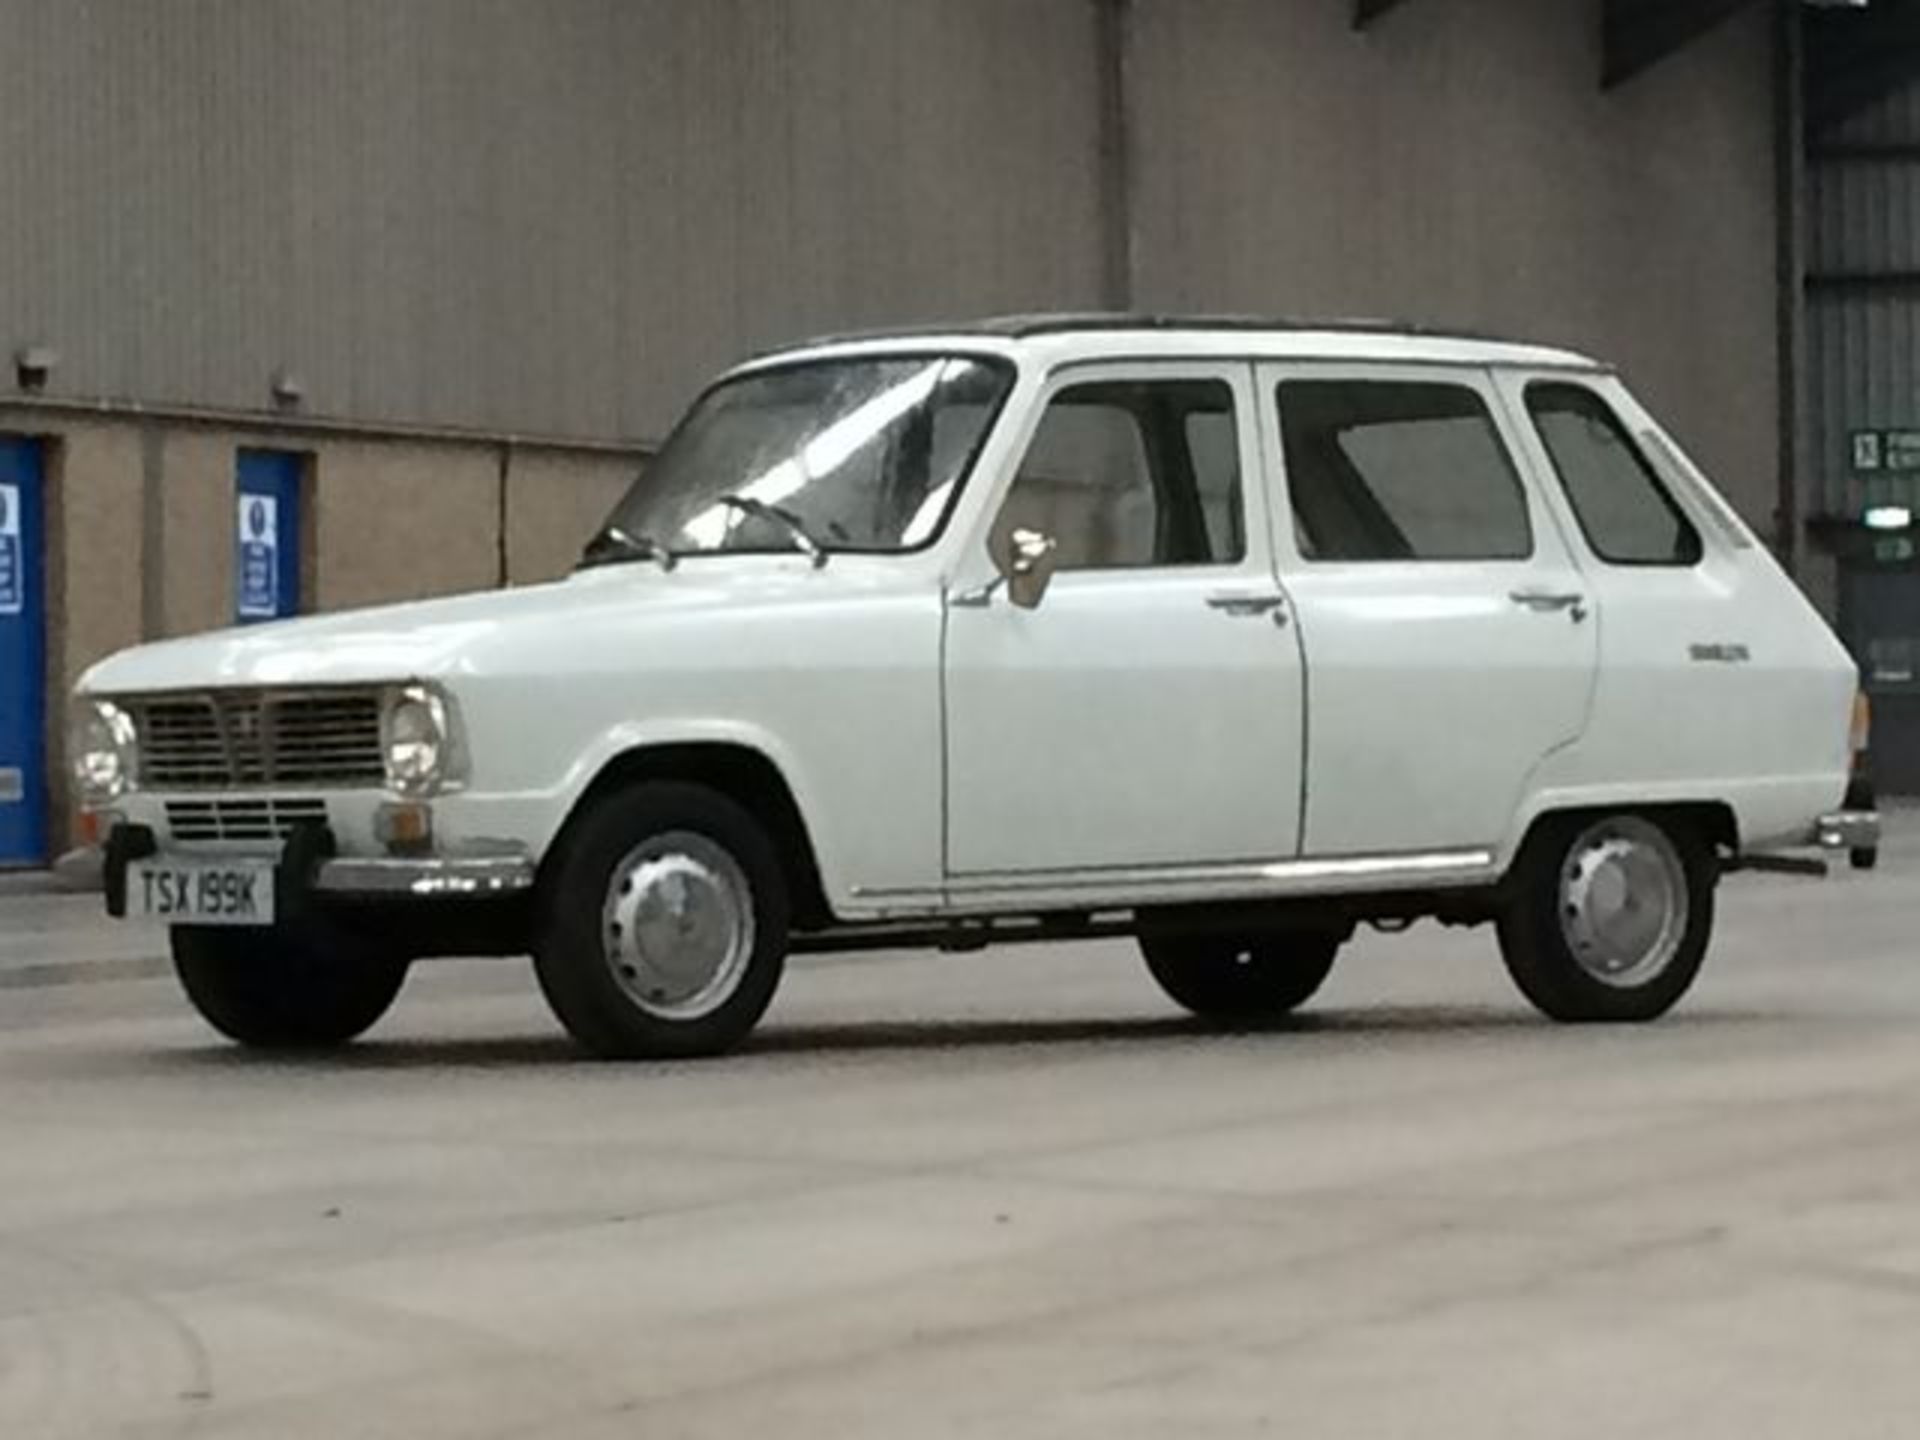 RENAULT 6 TL - 1108cc - Image 14 of 34